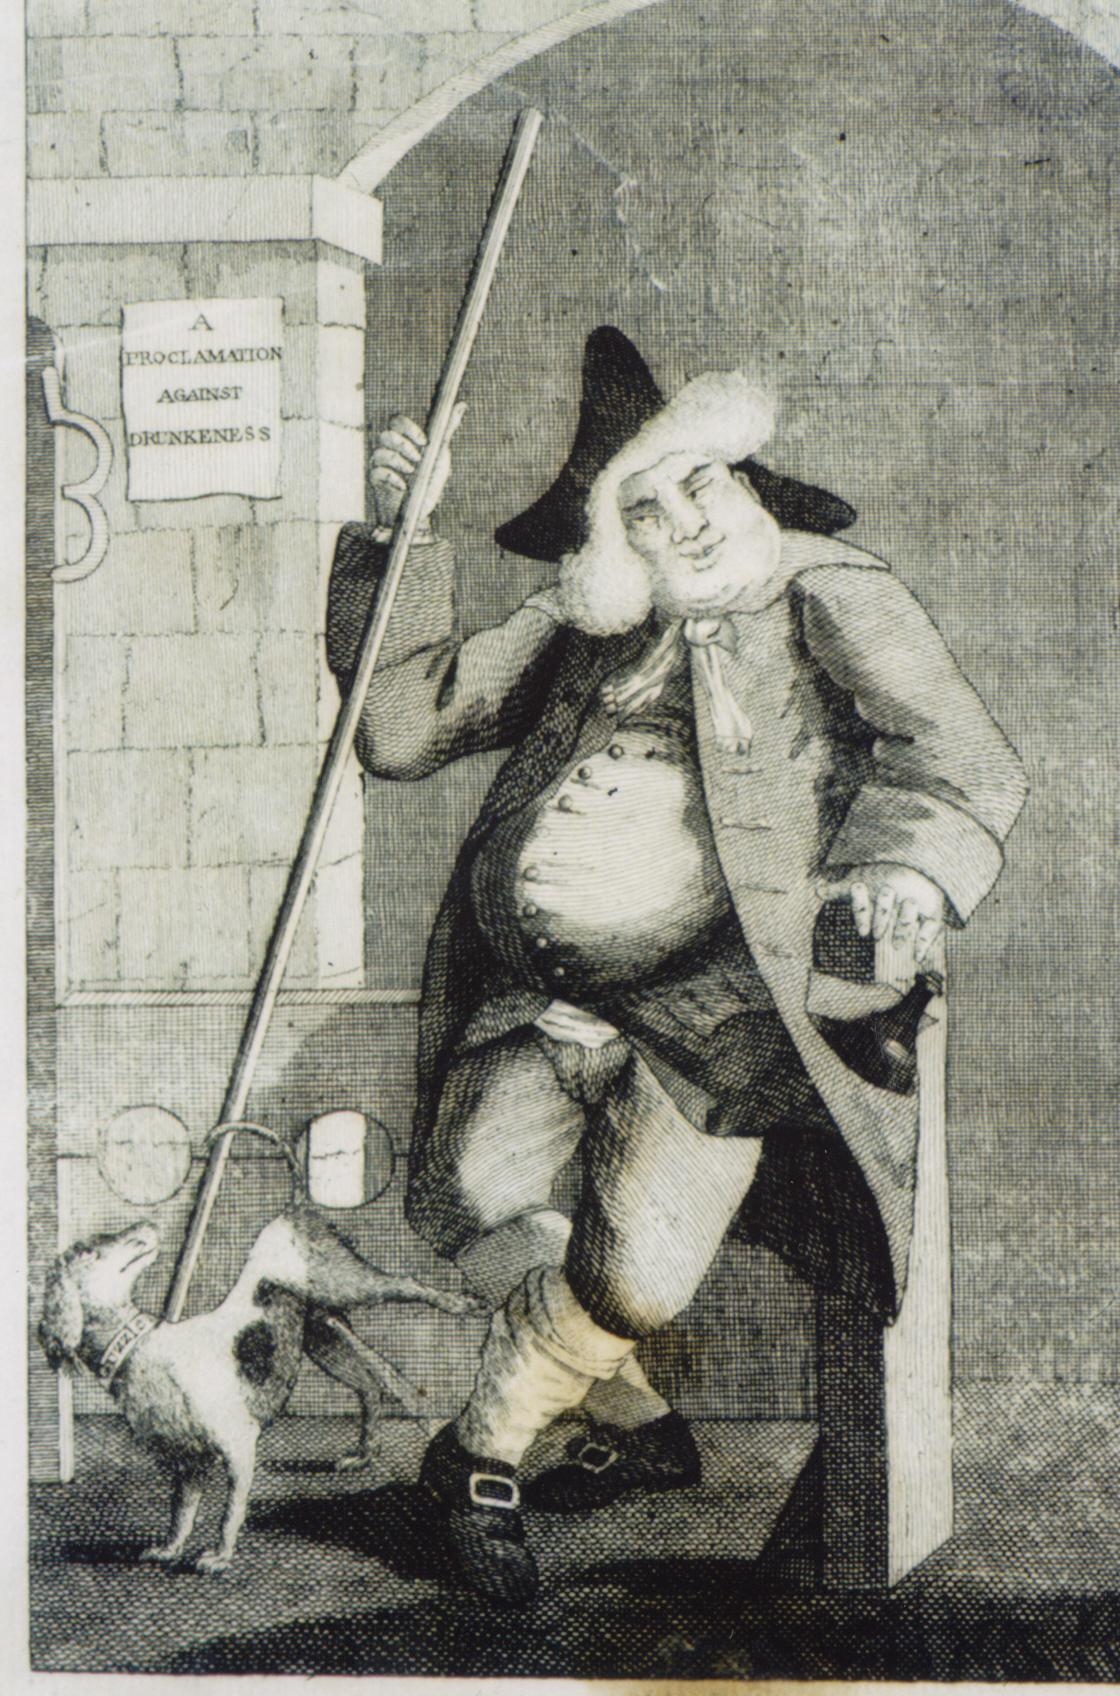 A fat man with a staff, leans against a bollard, a bottle clearly visible in his pocket.  He looks unsteady and drunk.  A dog is urinating on his shoe, and a large incongruous pair of glasses is resting on his staff.  On the wall behind him can be seen a sign reading: A Proclamation Against Drunkeness